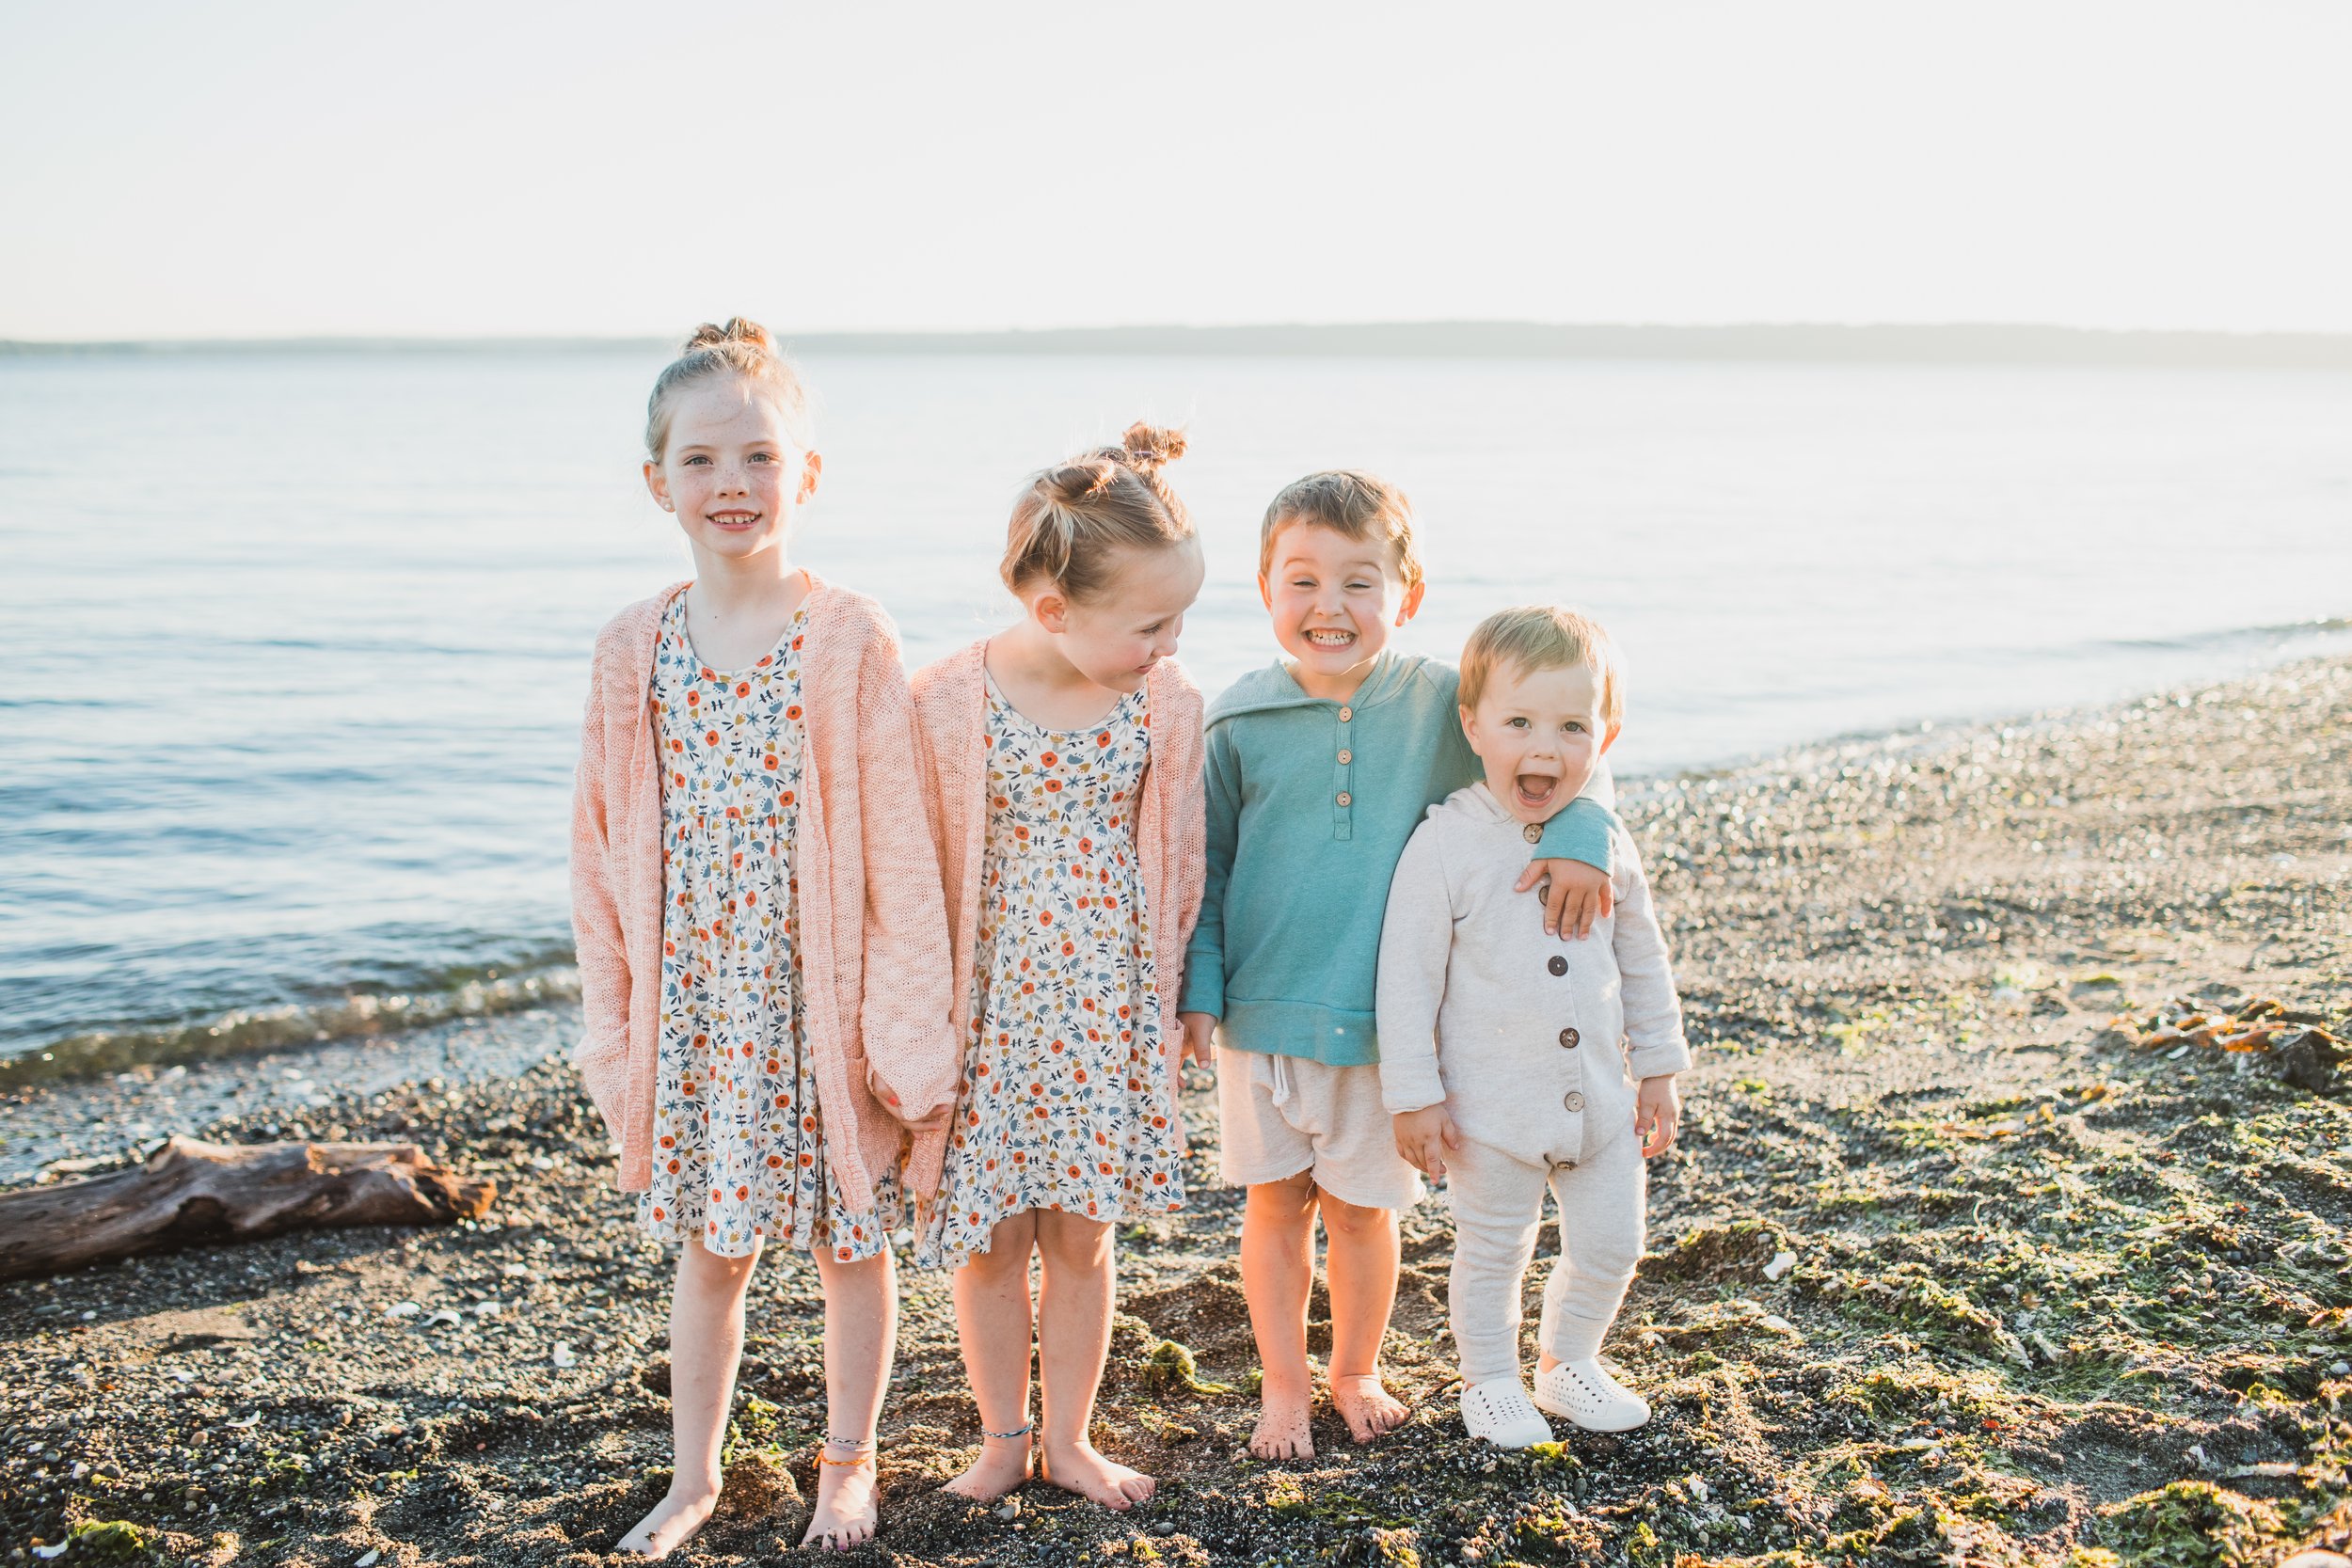 How to Display Family Photos  Seattle Family Photographer